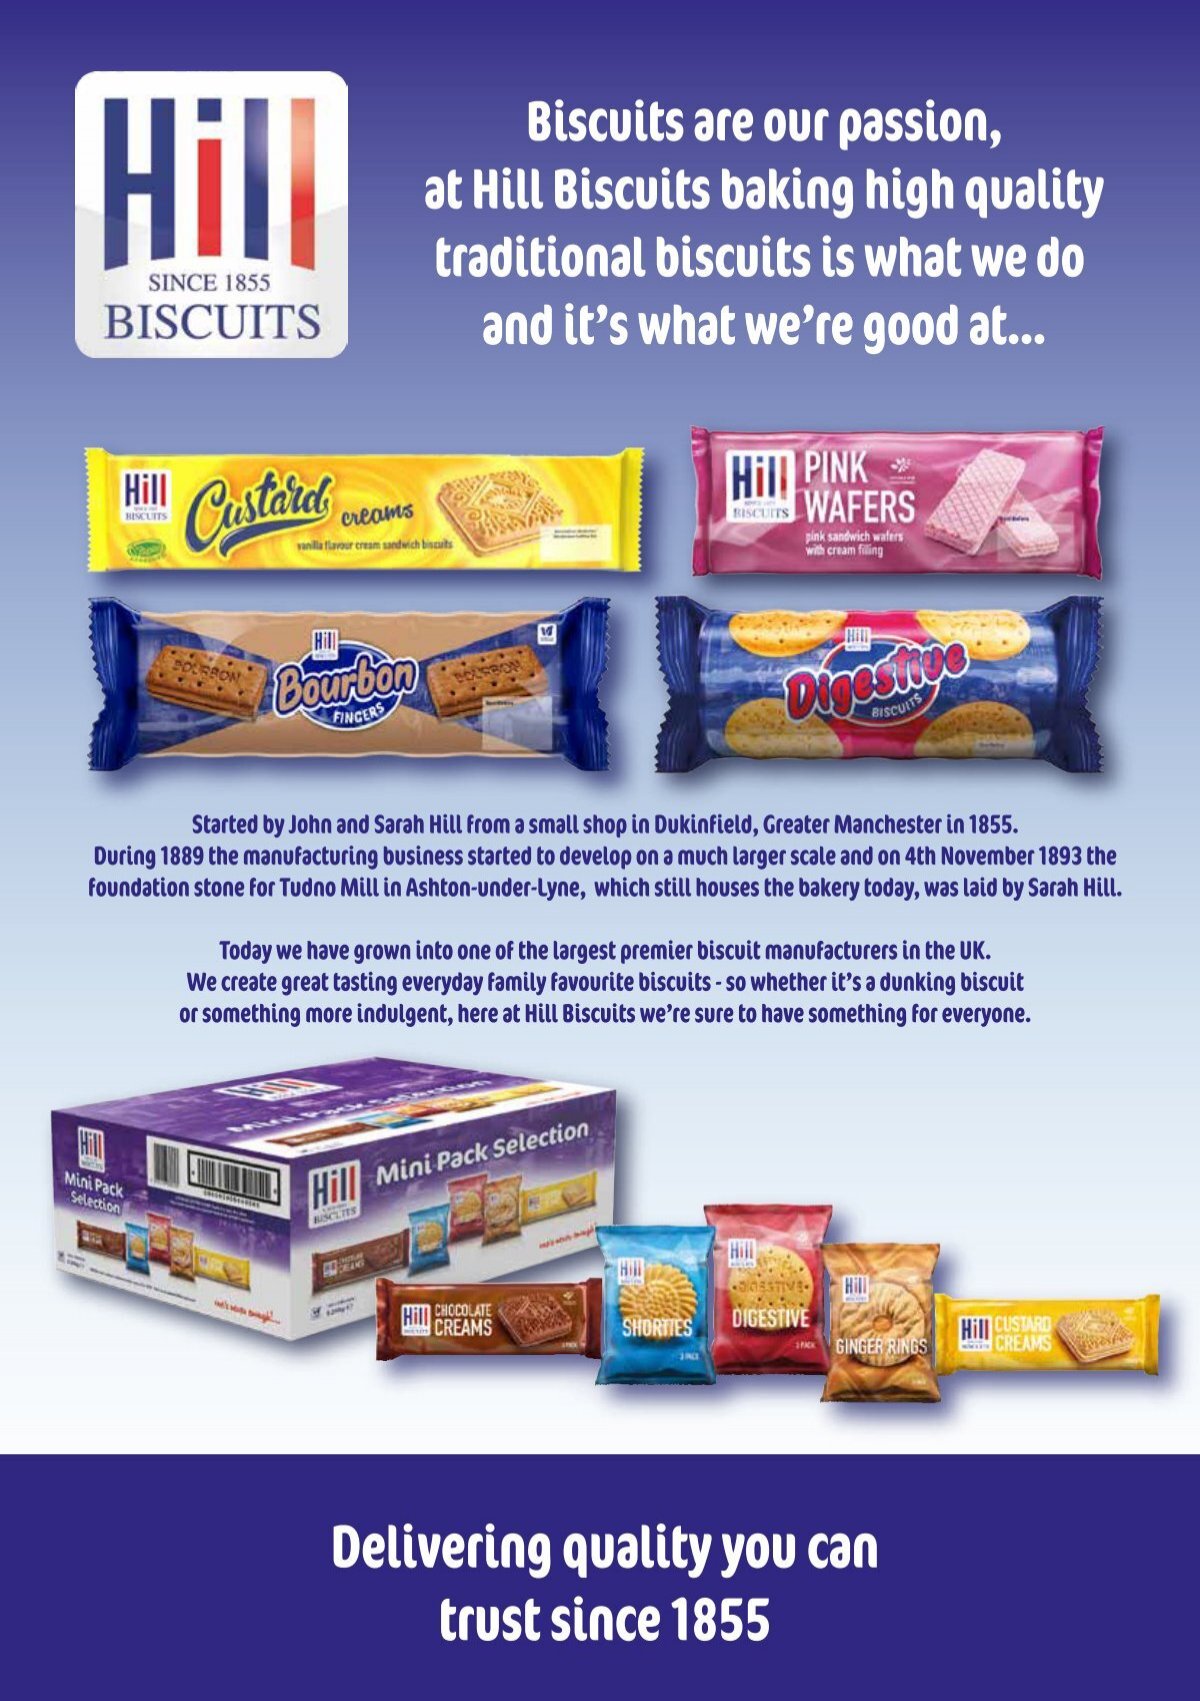 GROCERY BISCUITS - SNACK